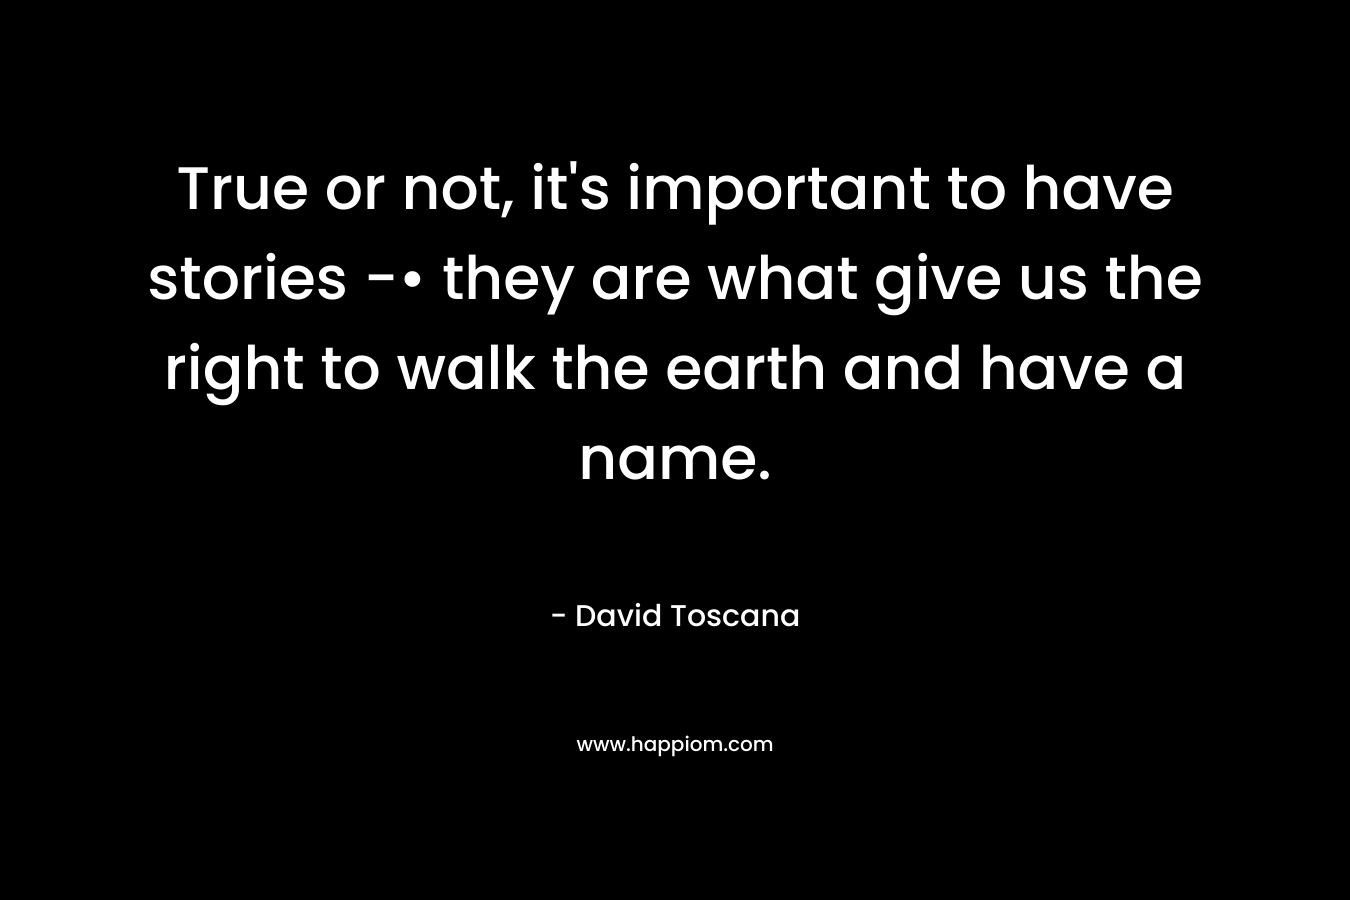 True or not, it’s important to have stories -• they are what give us the right to walk the earth and have a name. – David Toscana